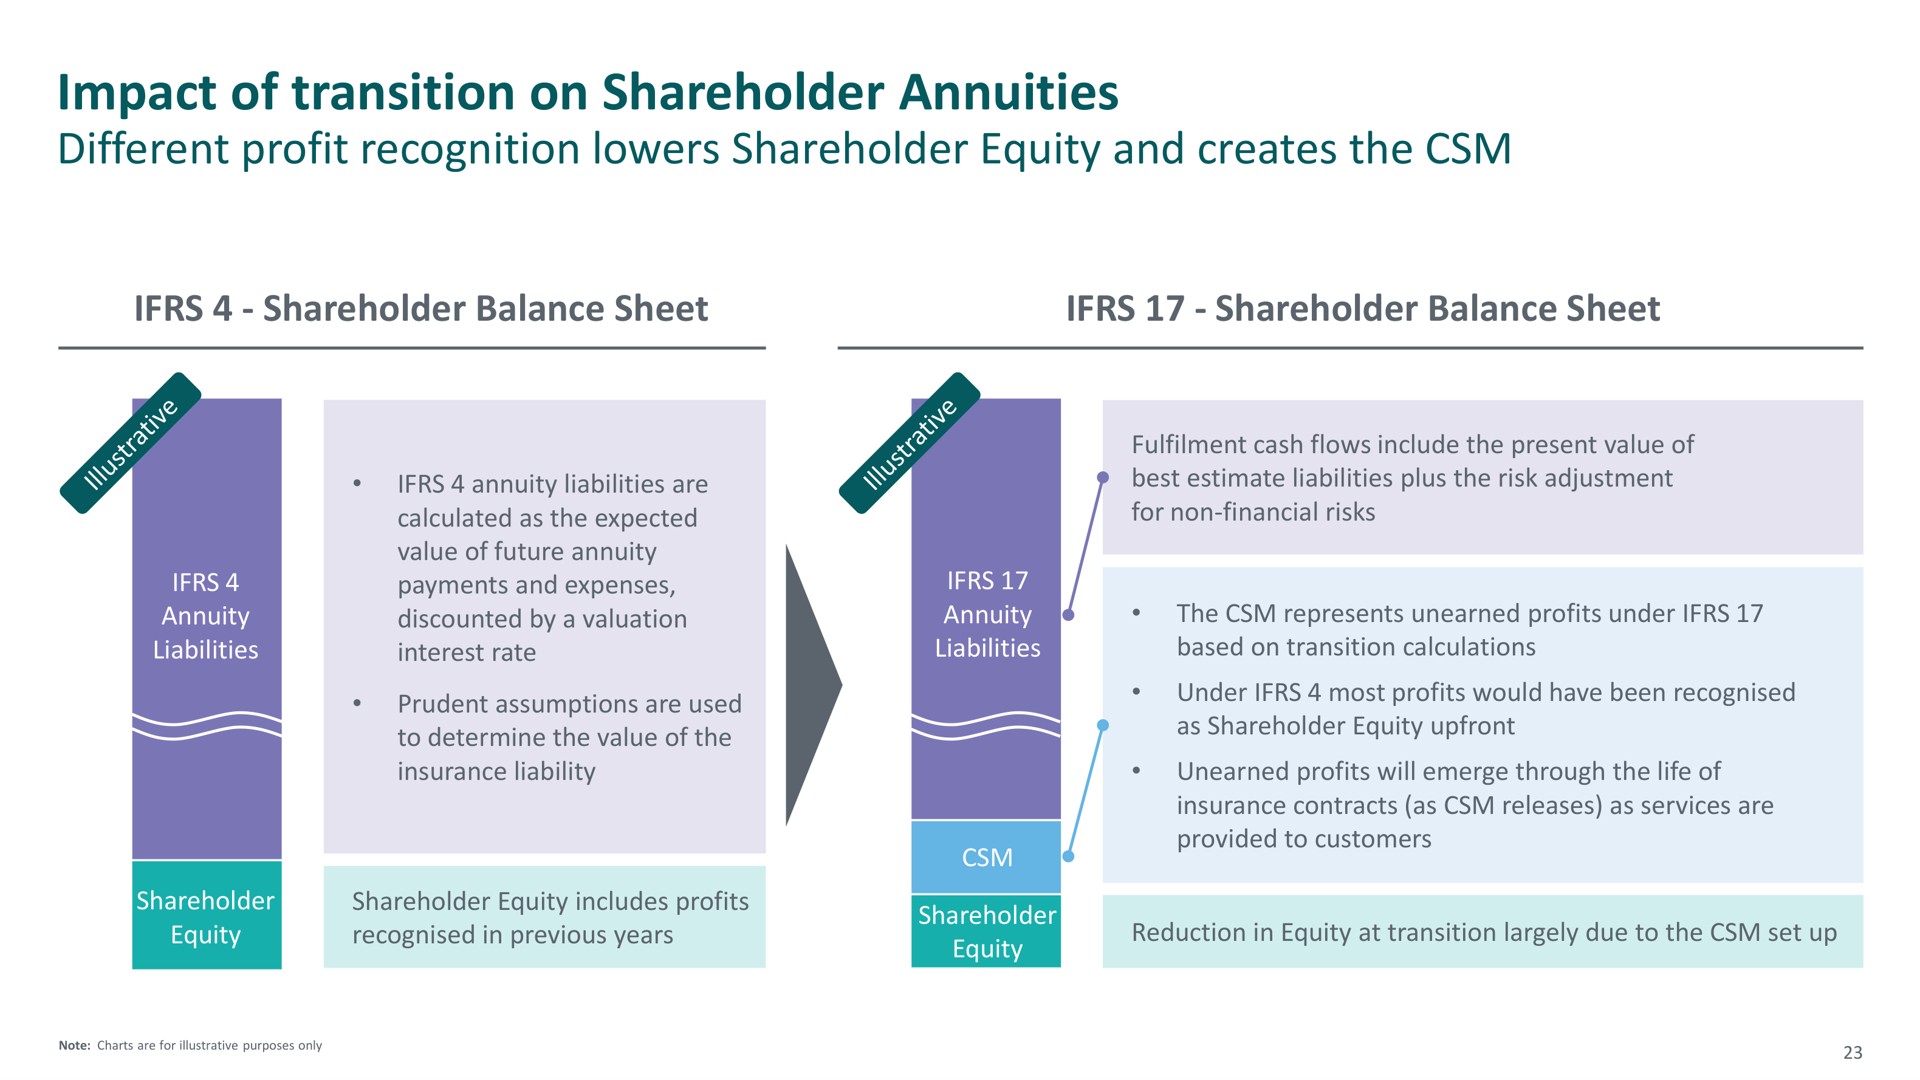 impact of transition on shareholder annuities | M&G